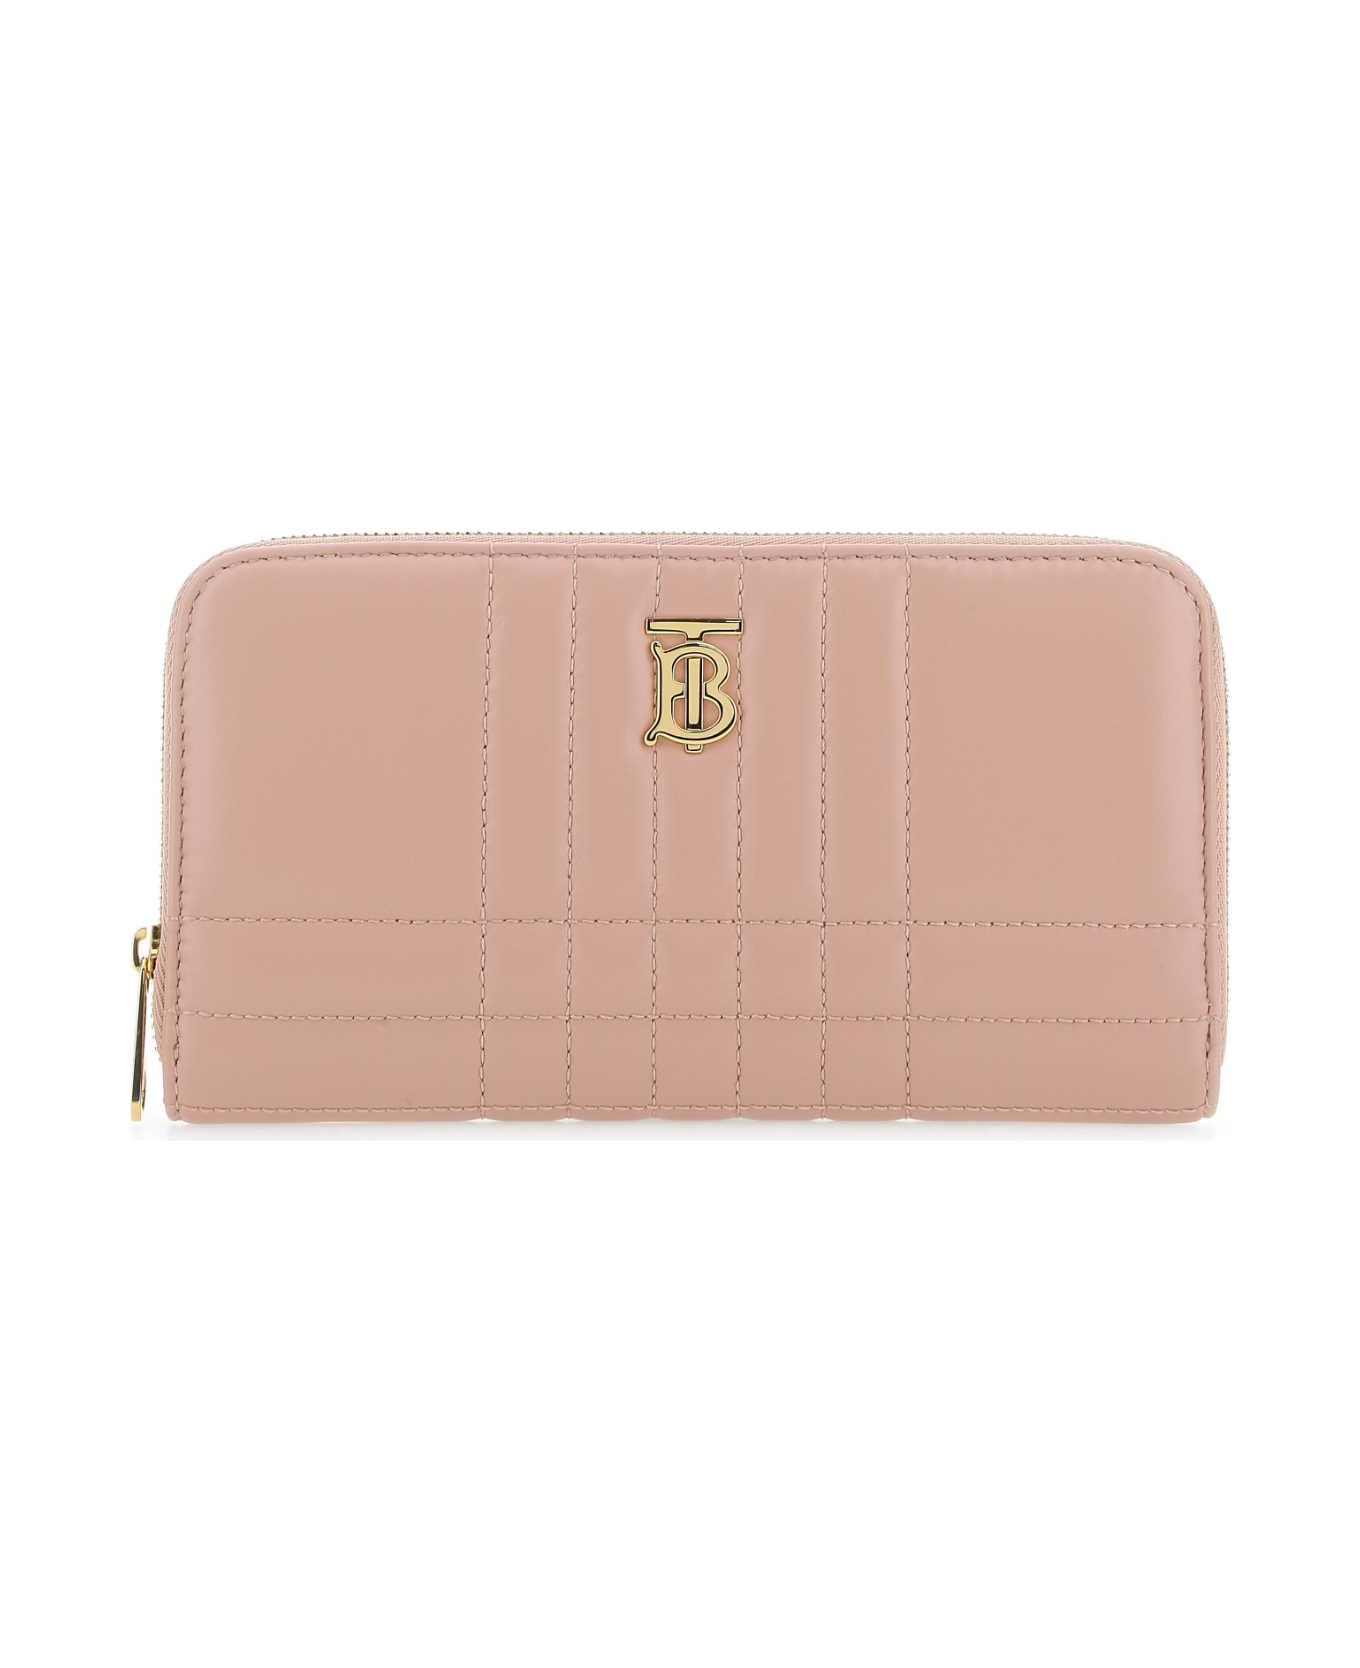 Burberry Pink Nappa Leather Lola Wallet - A3661 財布